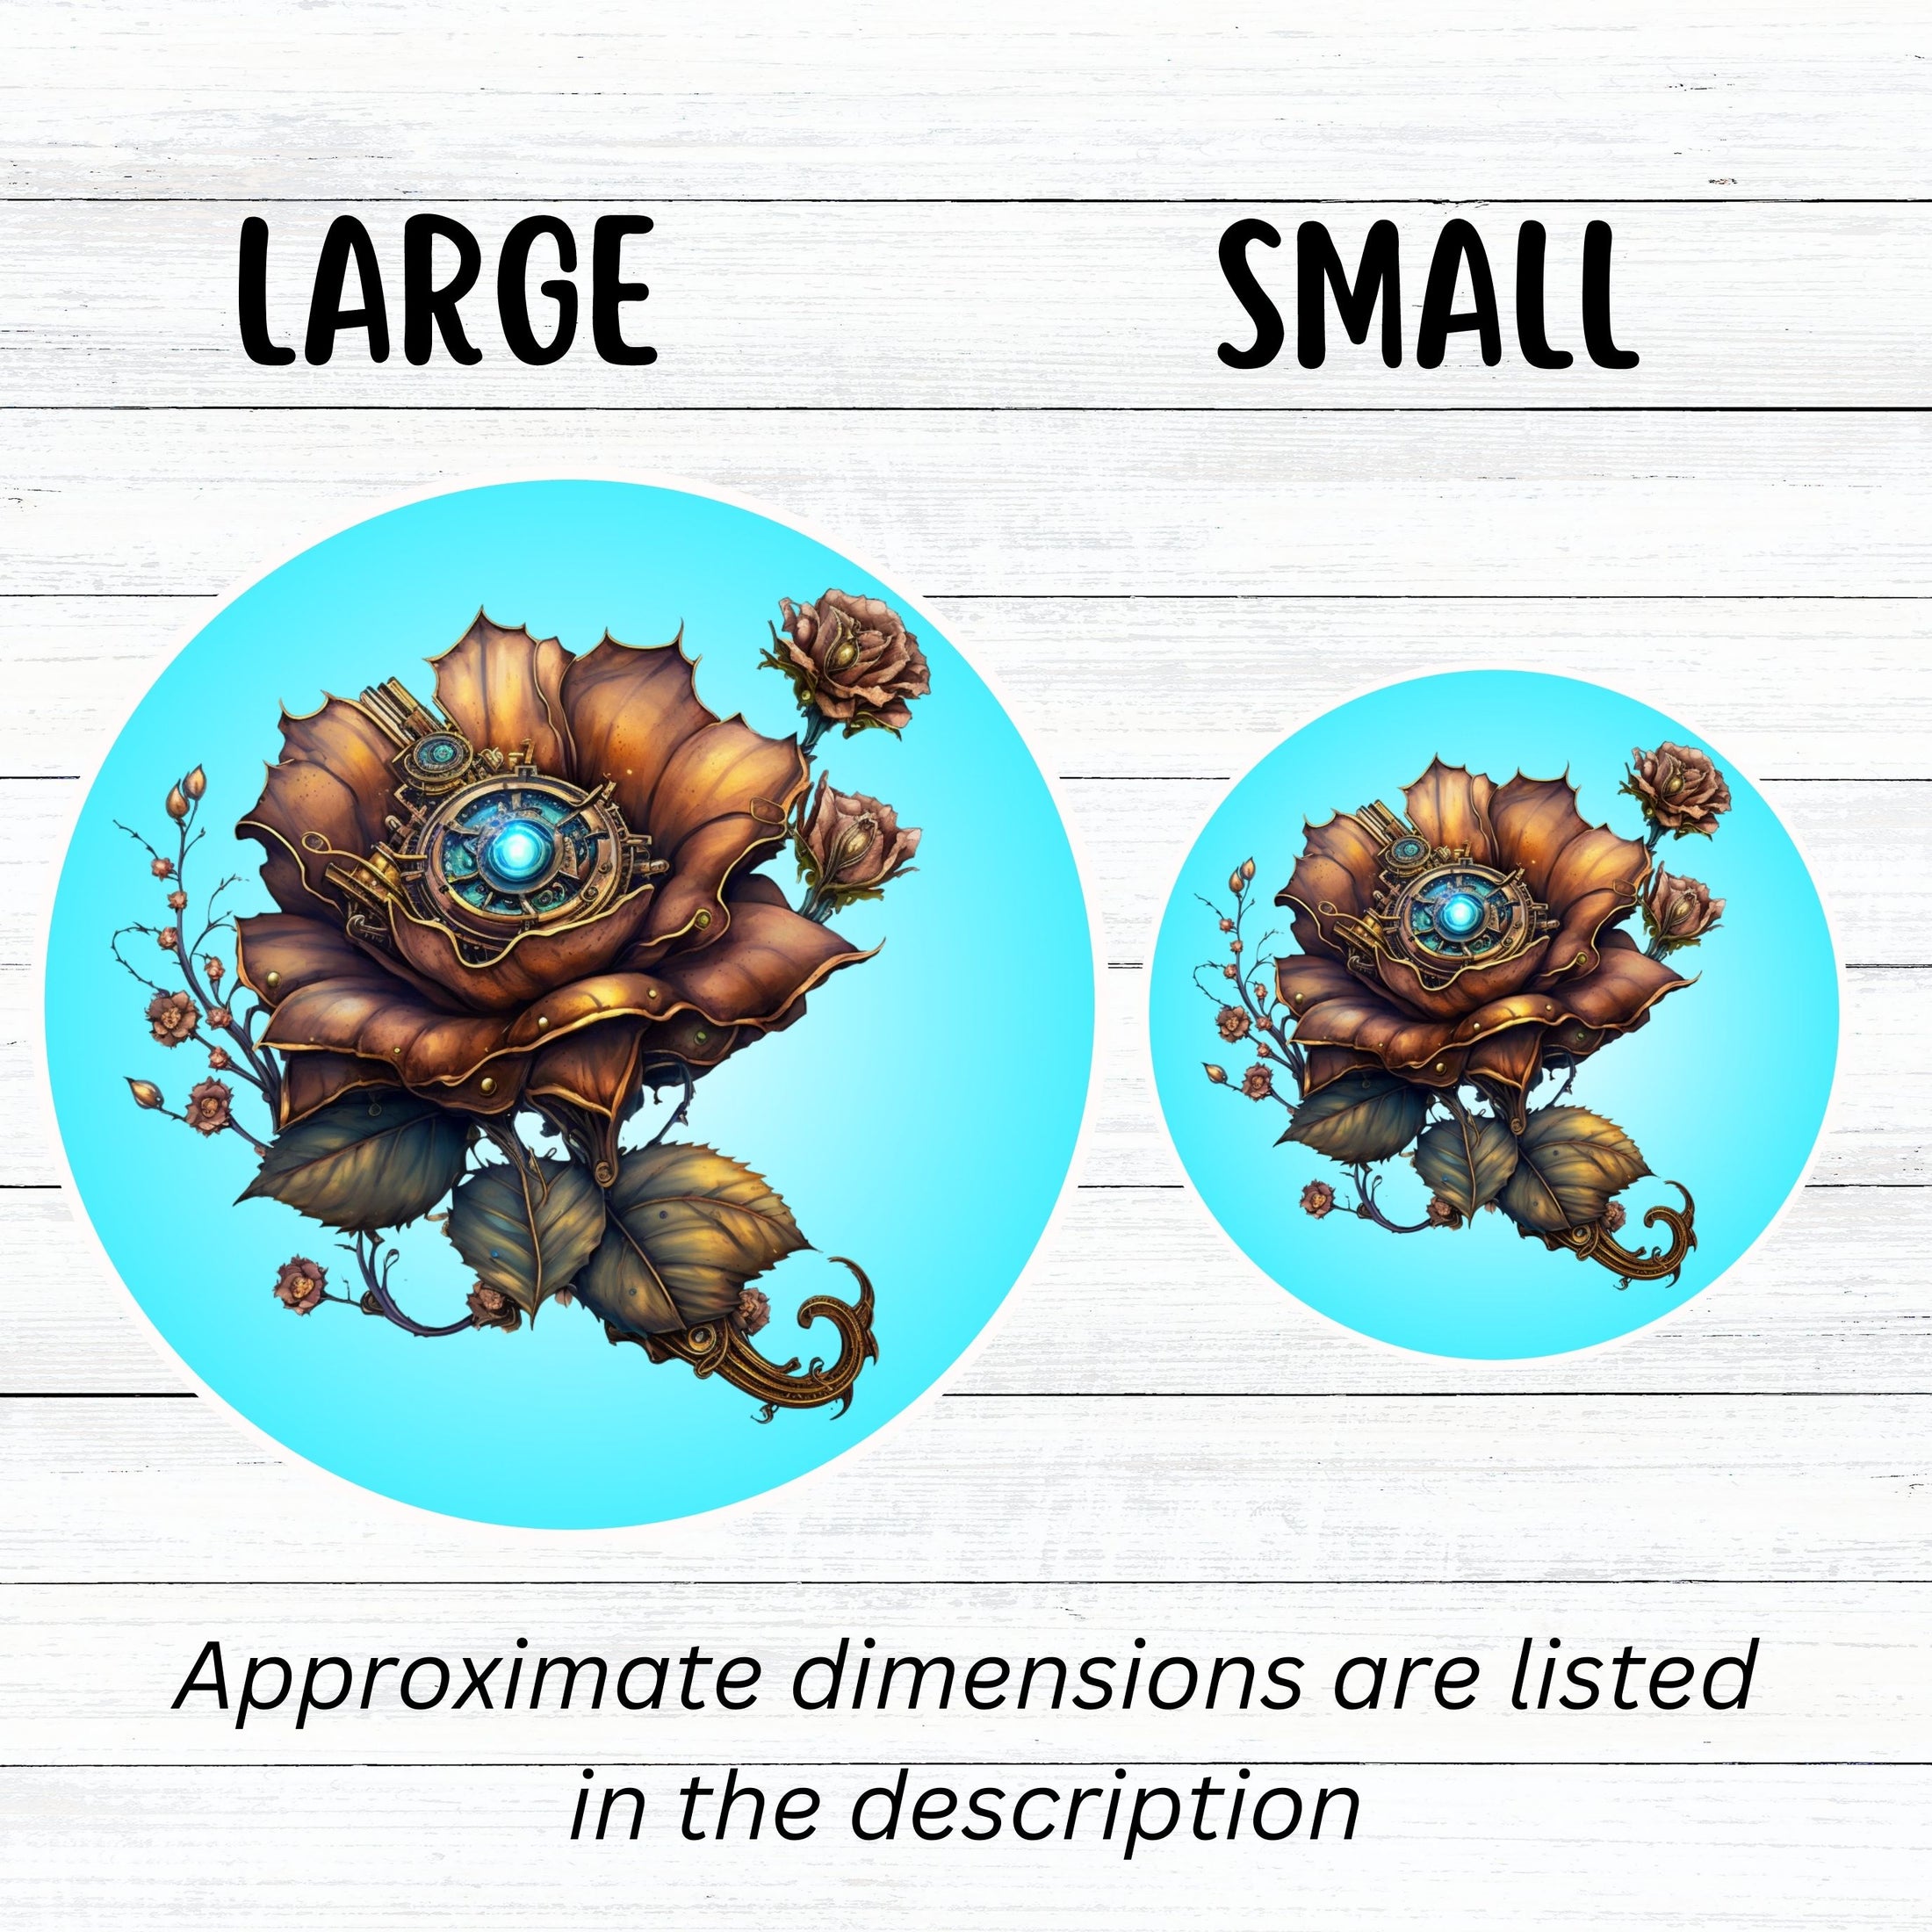 This image shows large and small steampunk bronzed flower stickers next to each other.